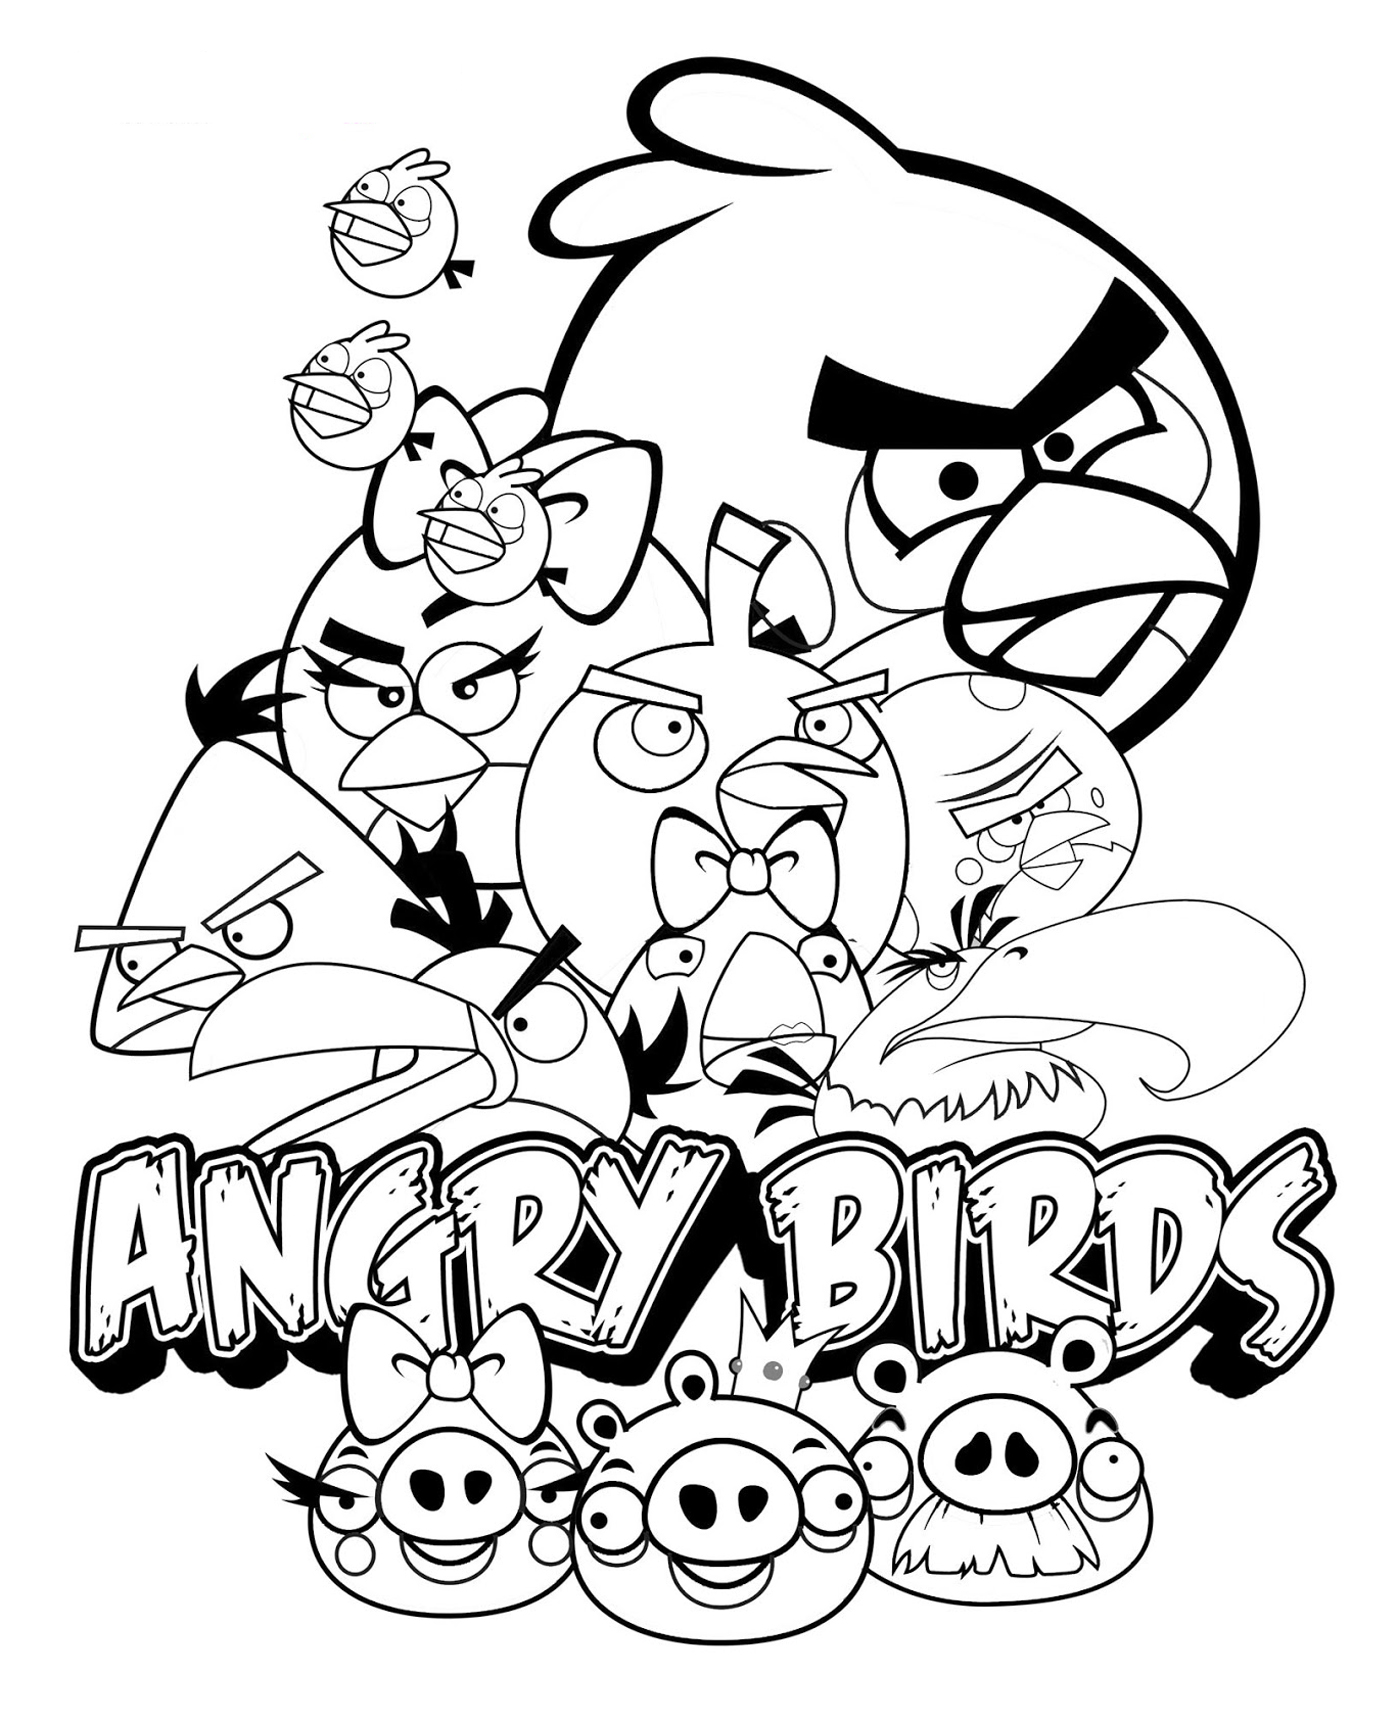 Angry birds coloring pages for kids - Angry Birds Kids Coloring Pages